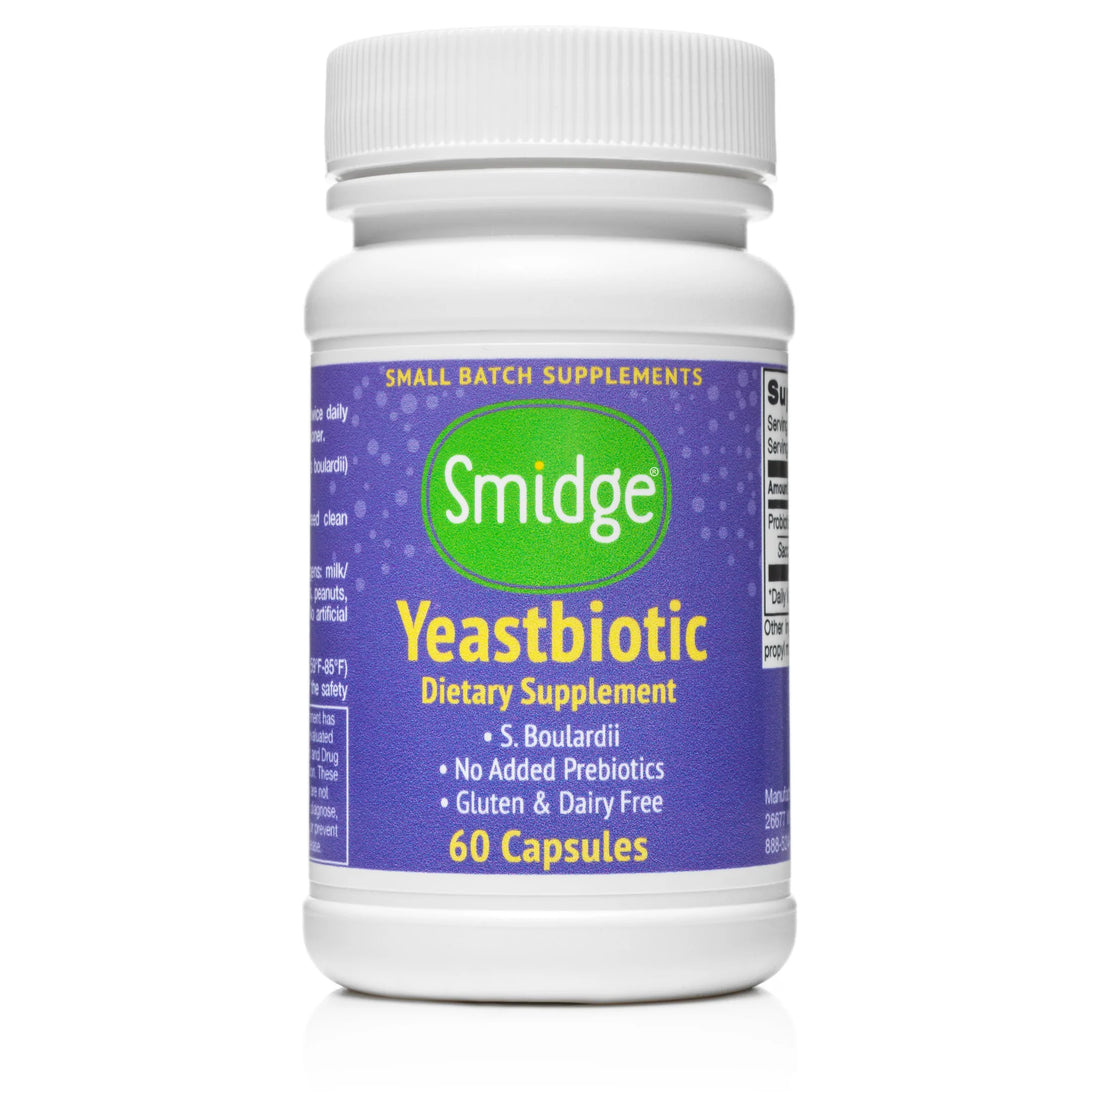 Smidge Yeastbiotic: A Natural Way to Support and Improve your Gut